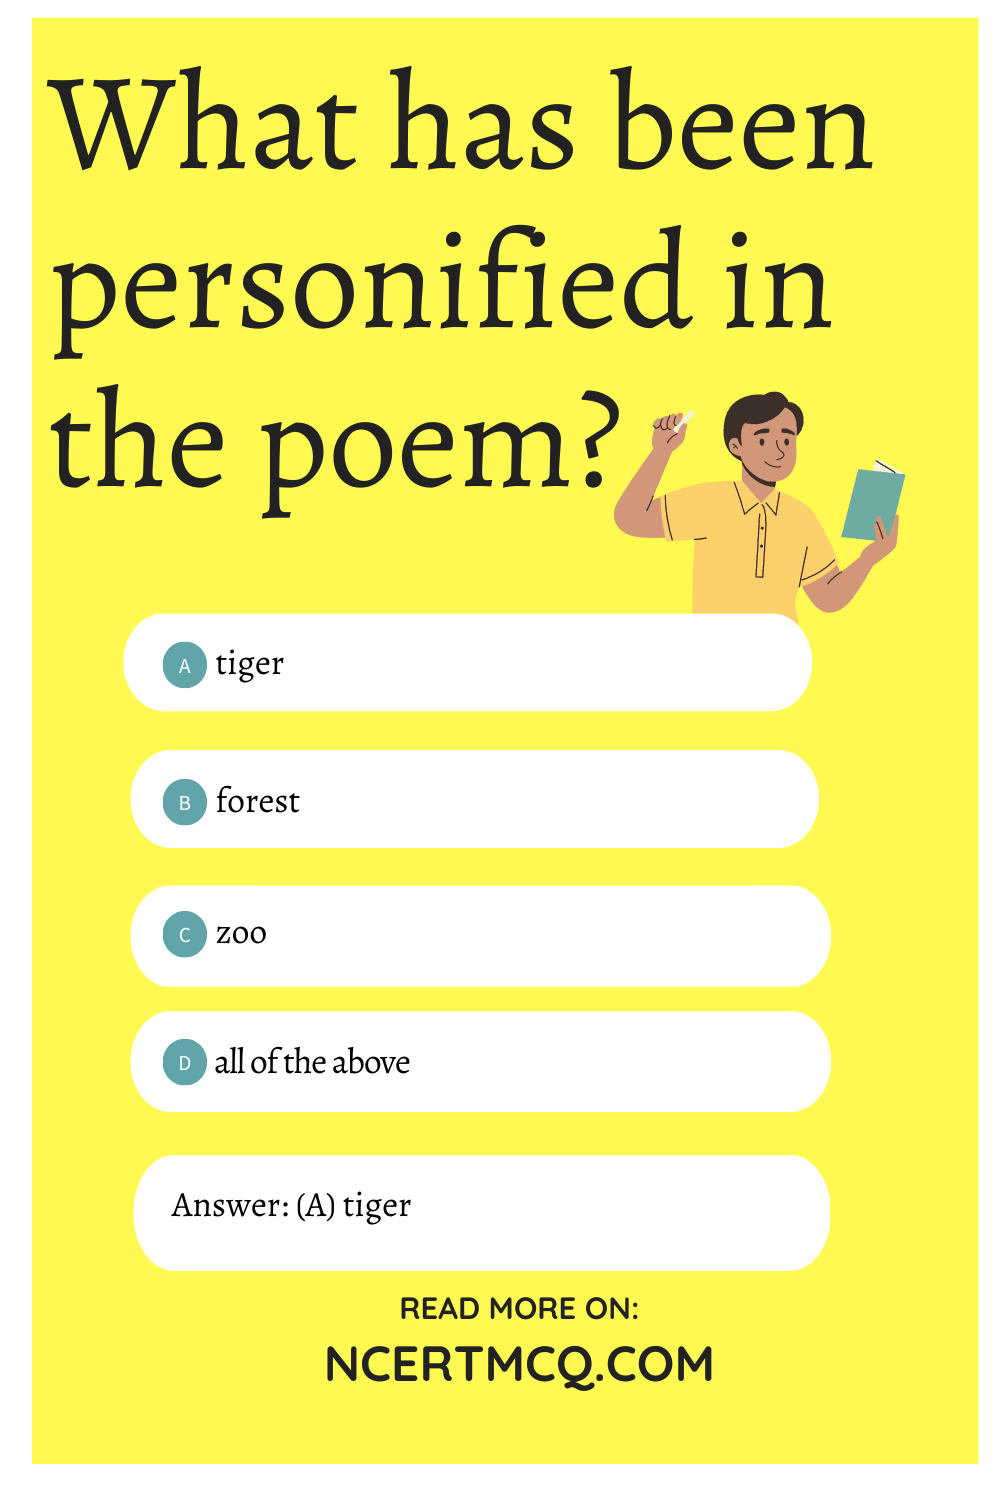 What has been personified in the poem?